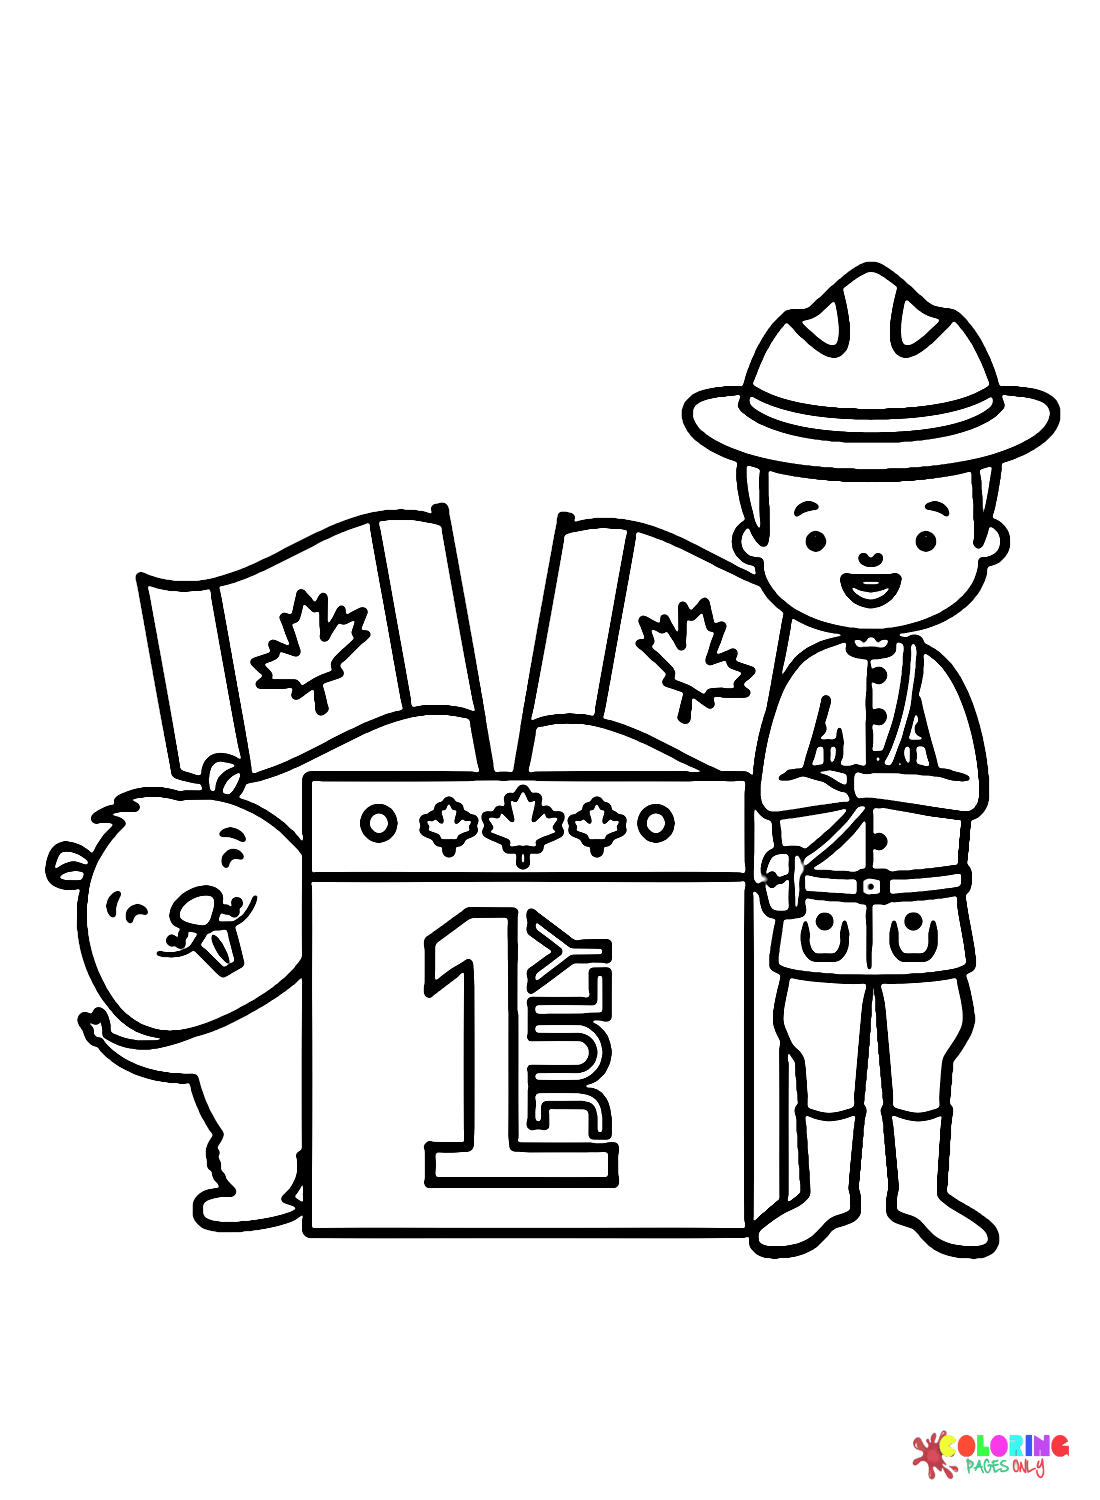 1 July Canada Day Coloring Page